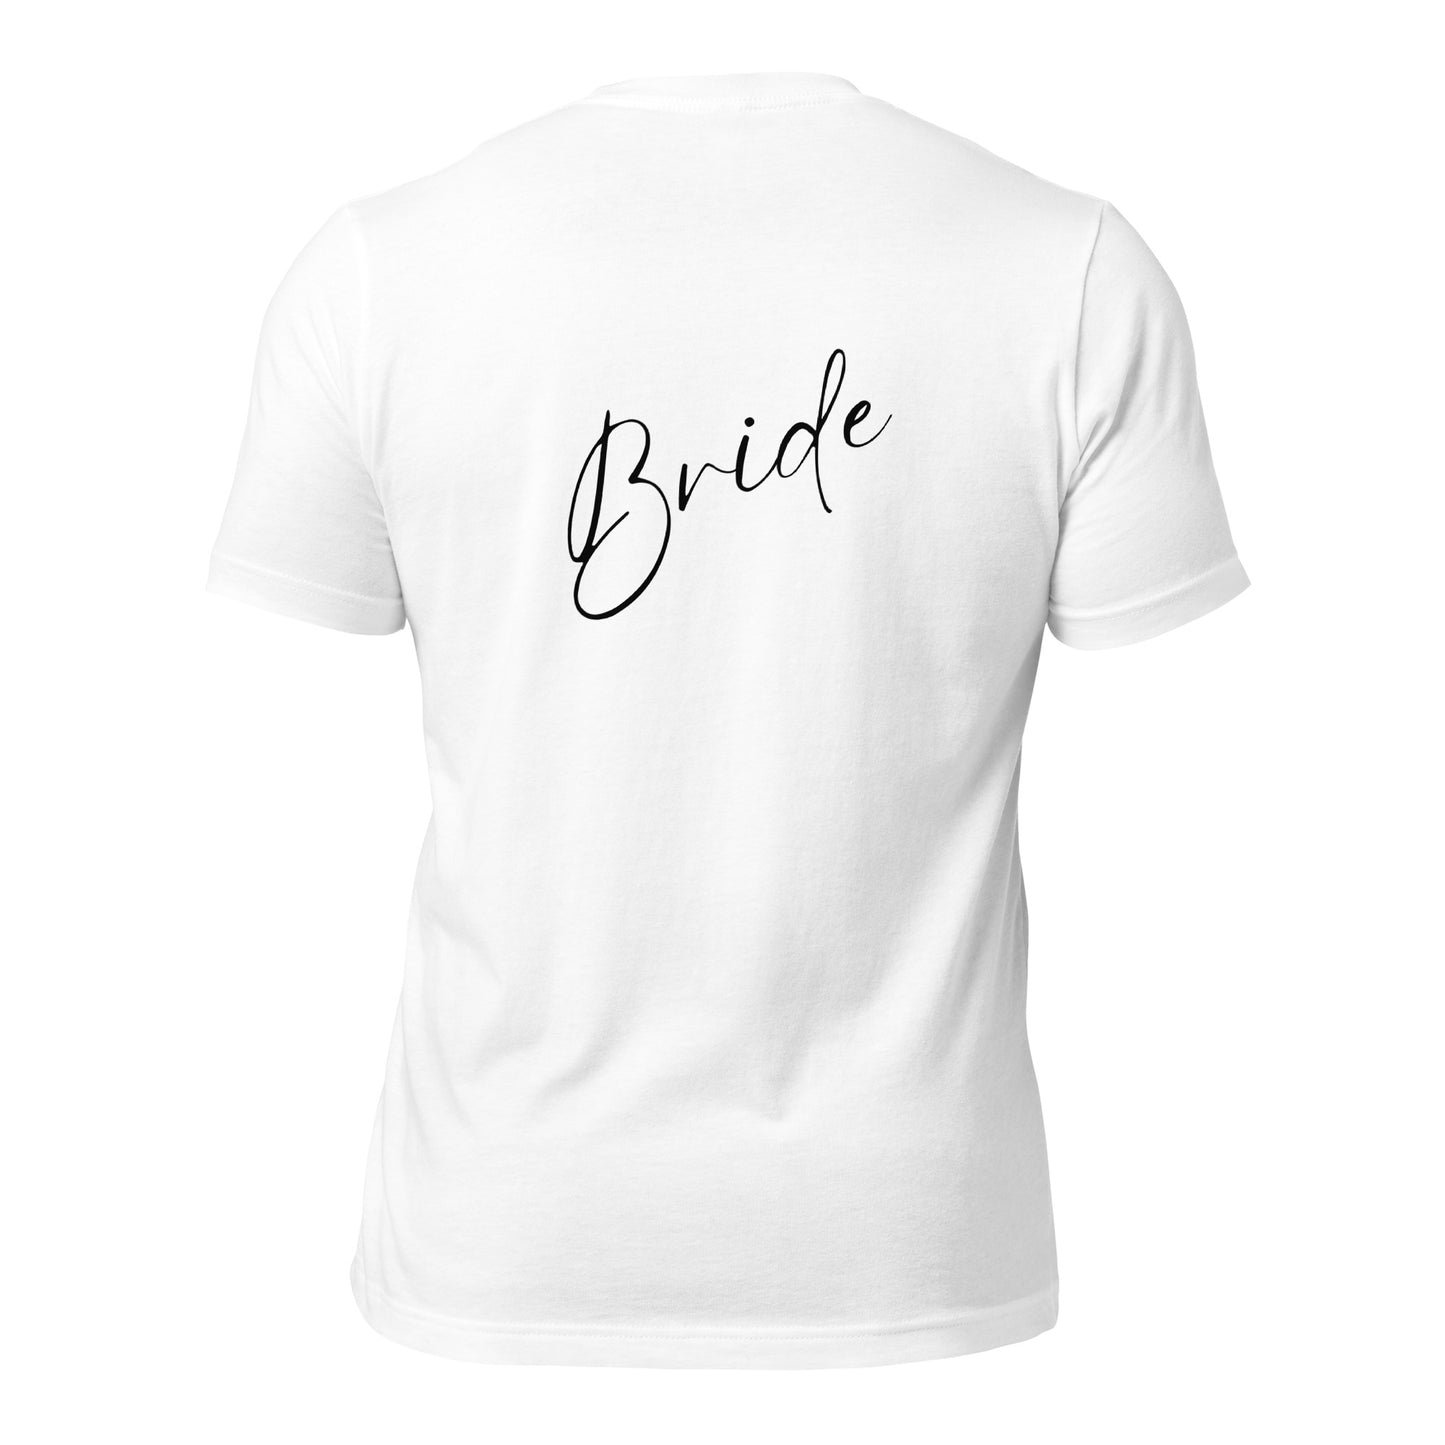 Bride Embroidered Front T-Shirt